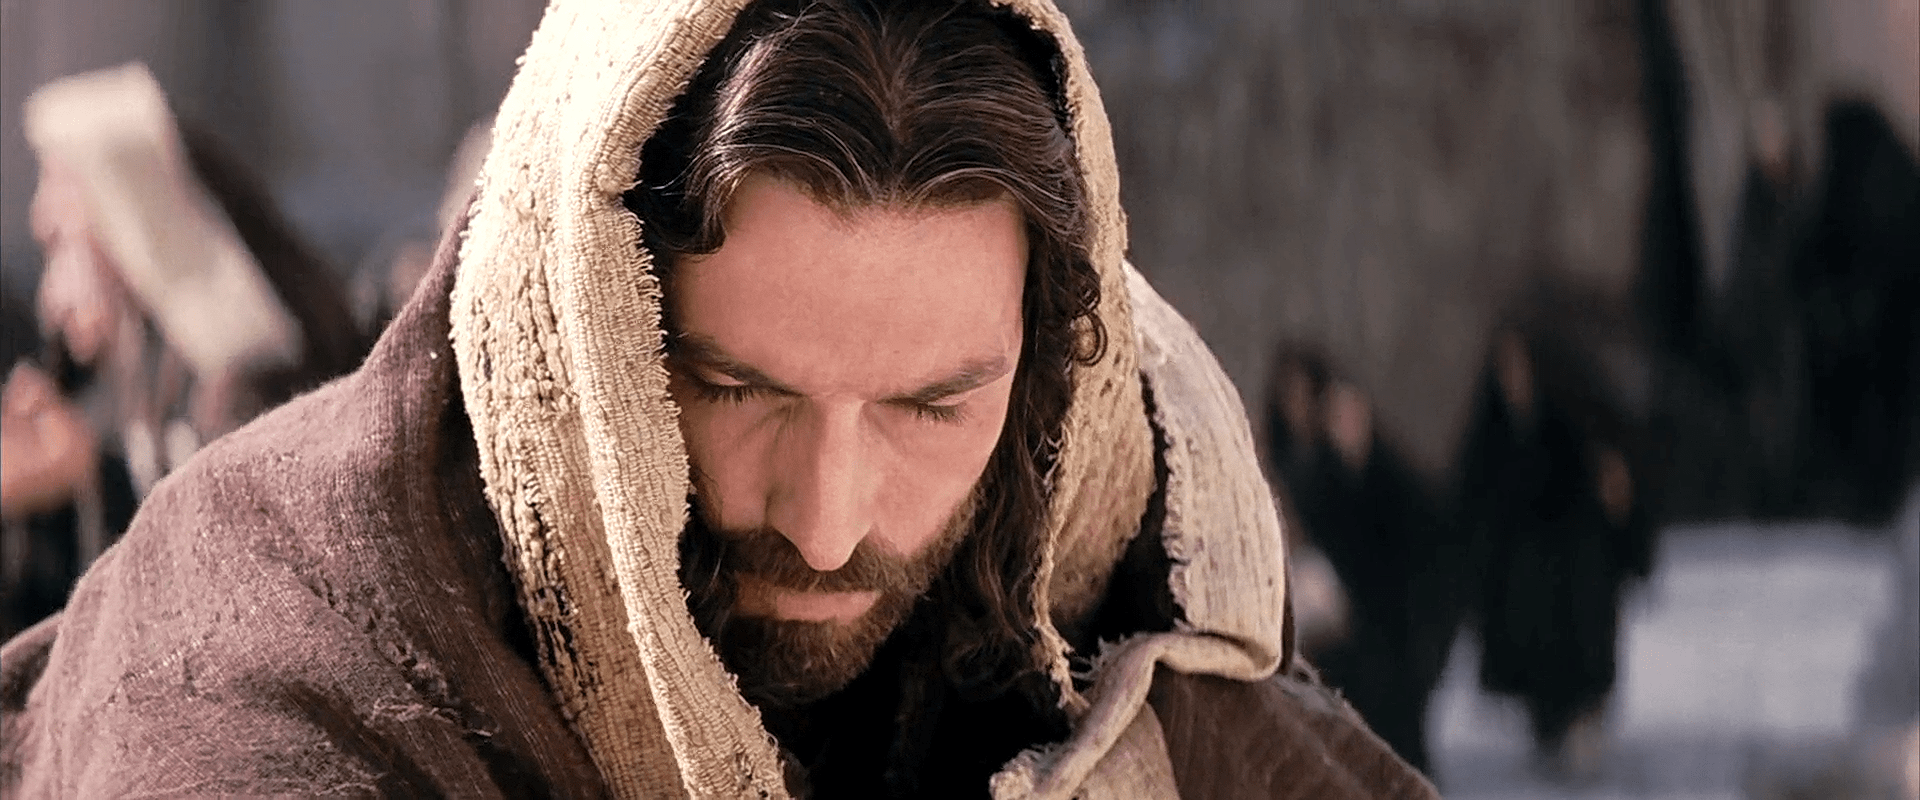 watch passion of the christ full movie